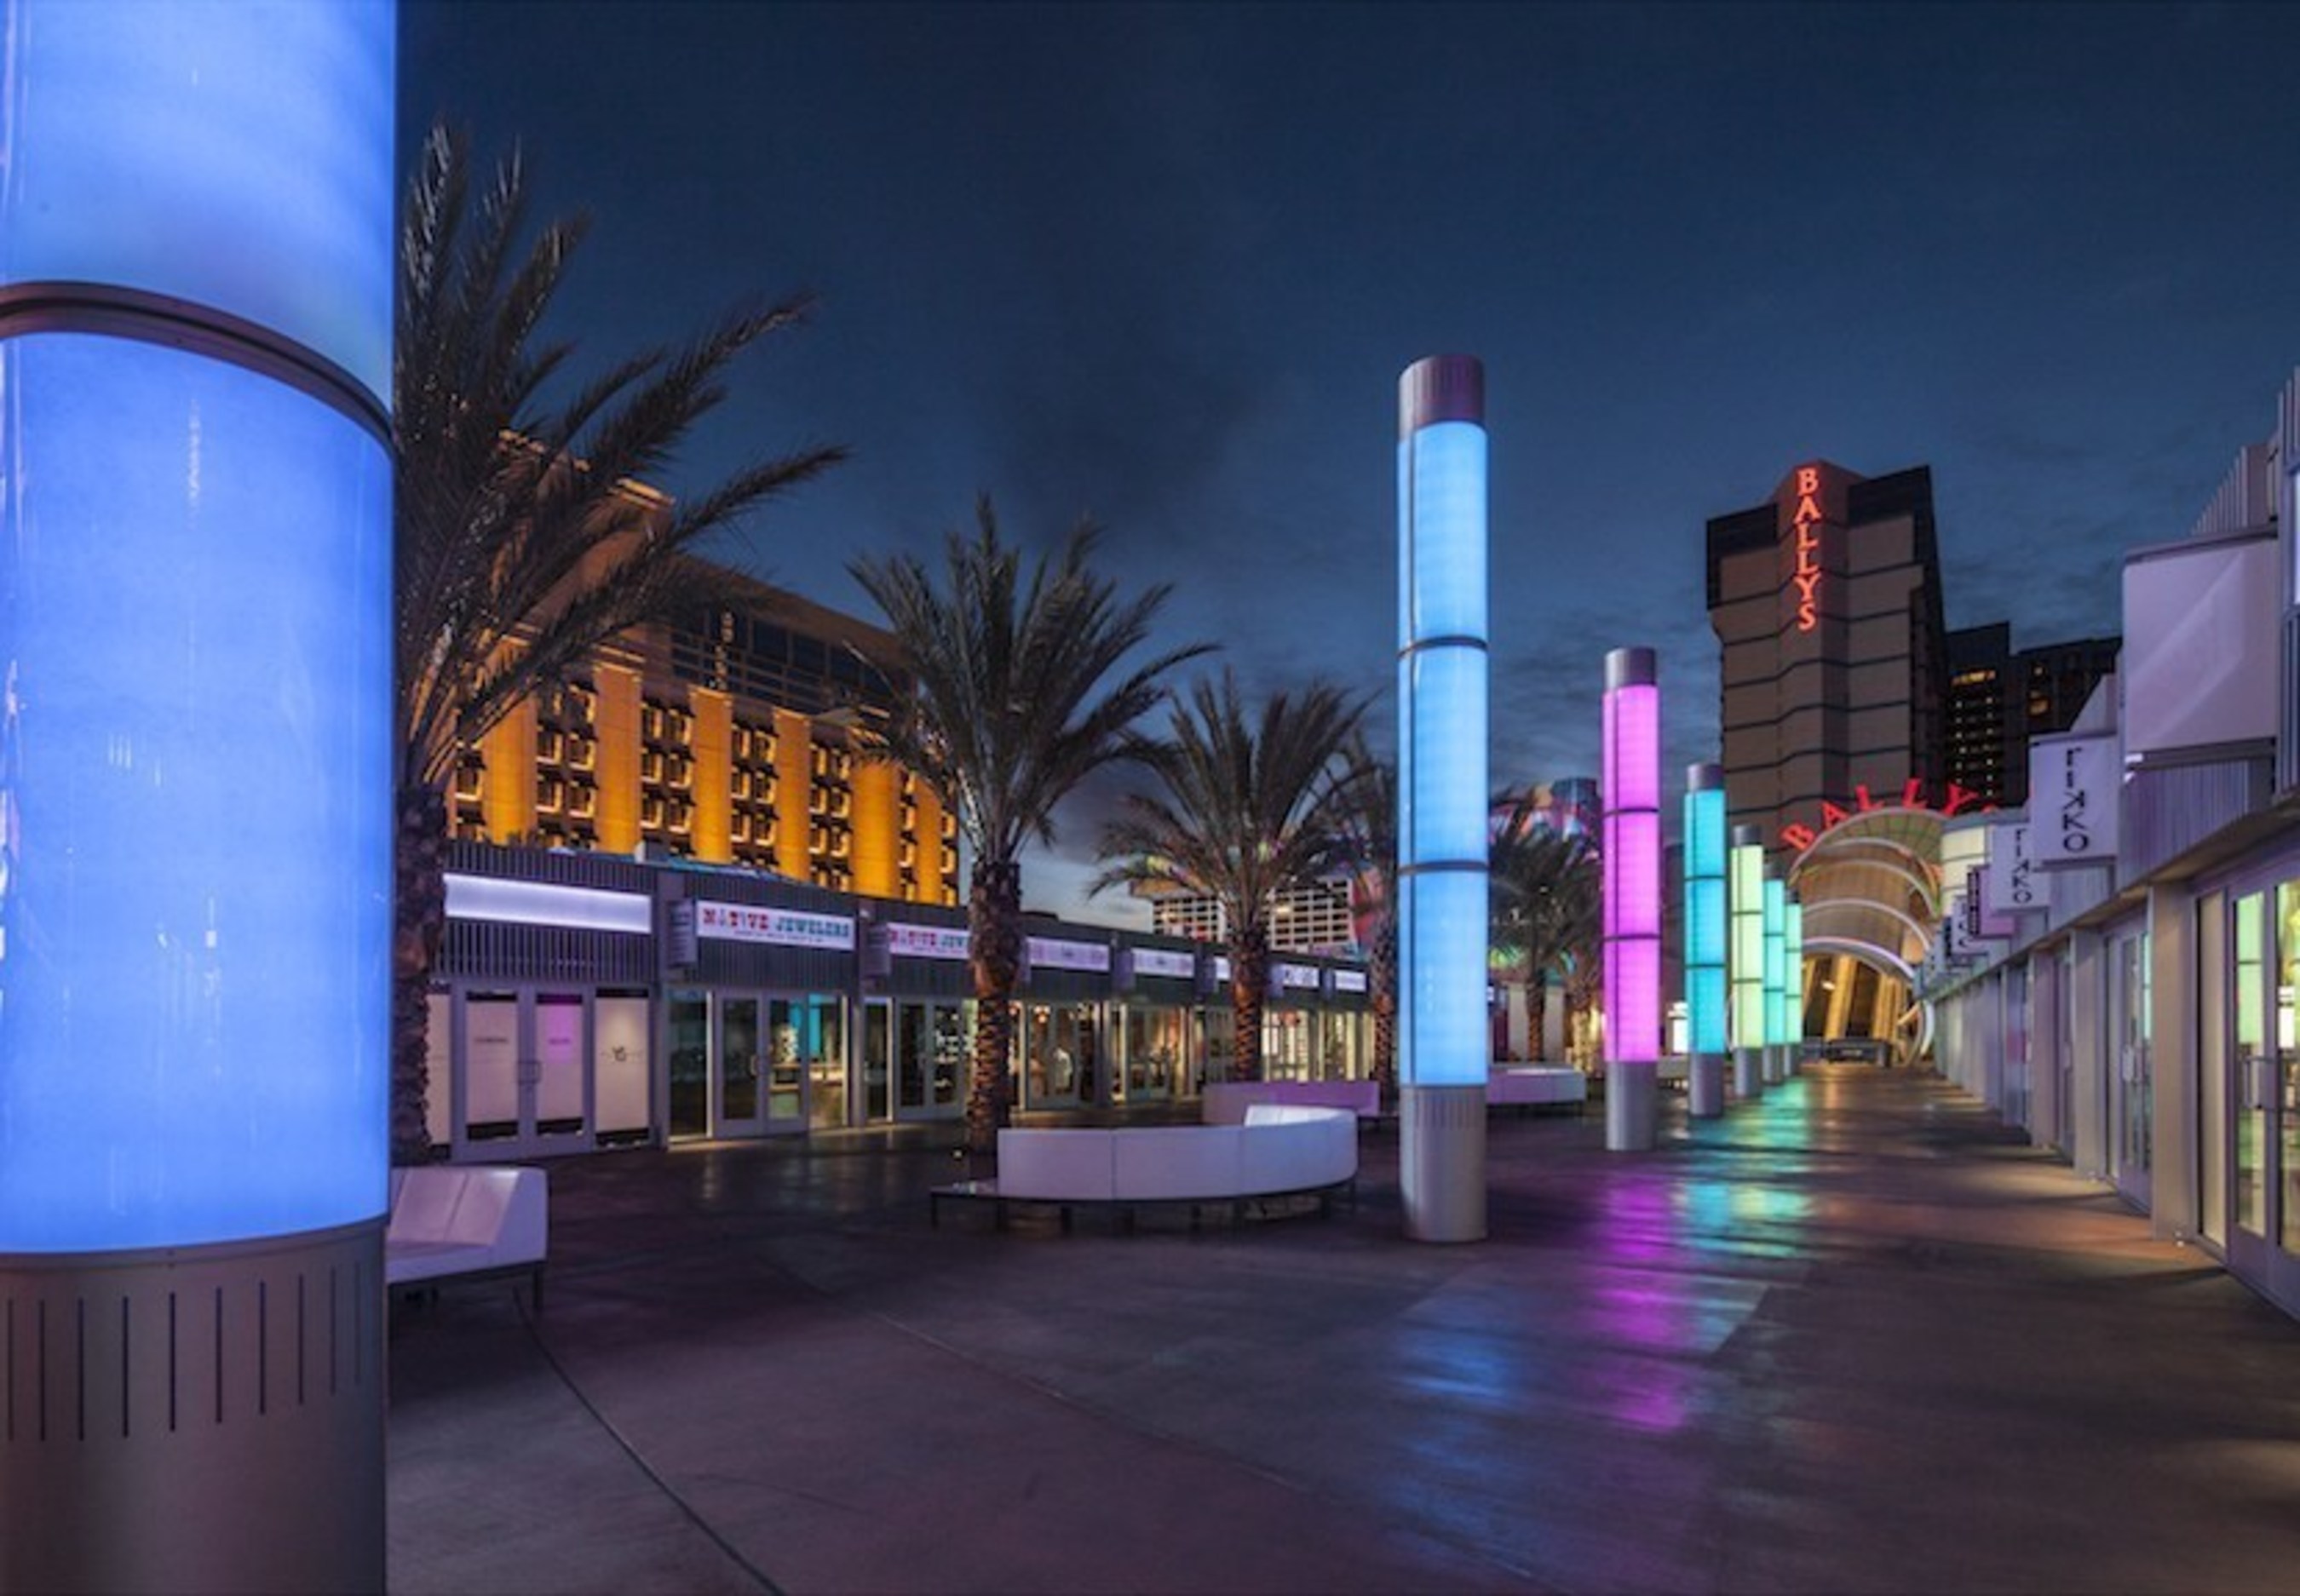 YESCO fabricated the tall cylindrical color changing light posts that line the open plaza space in the center of the project.